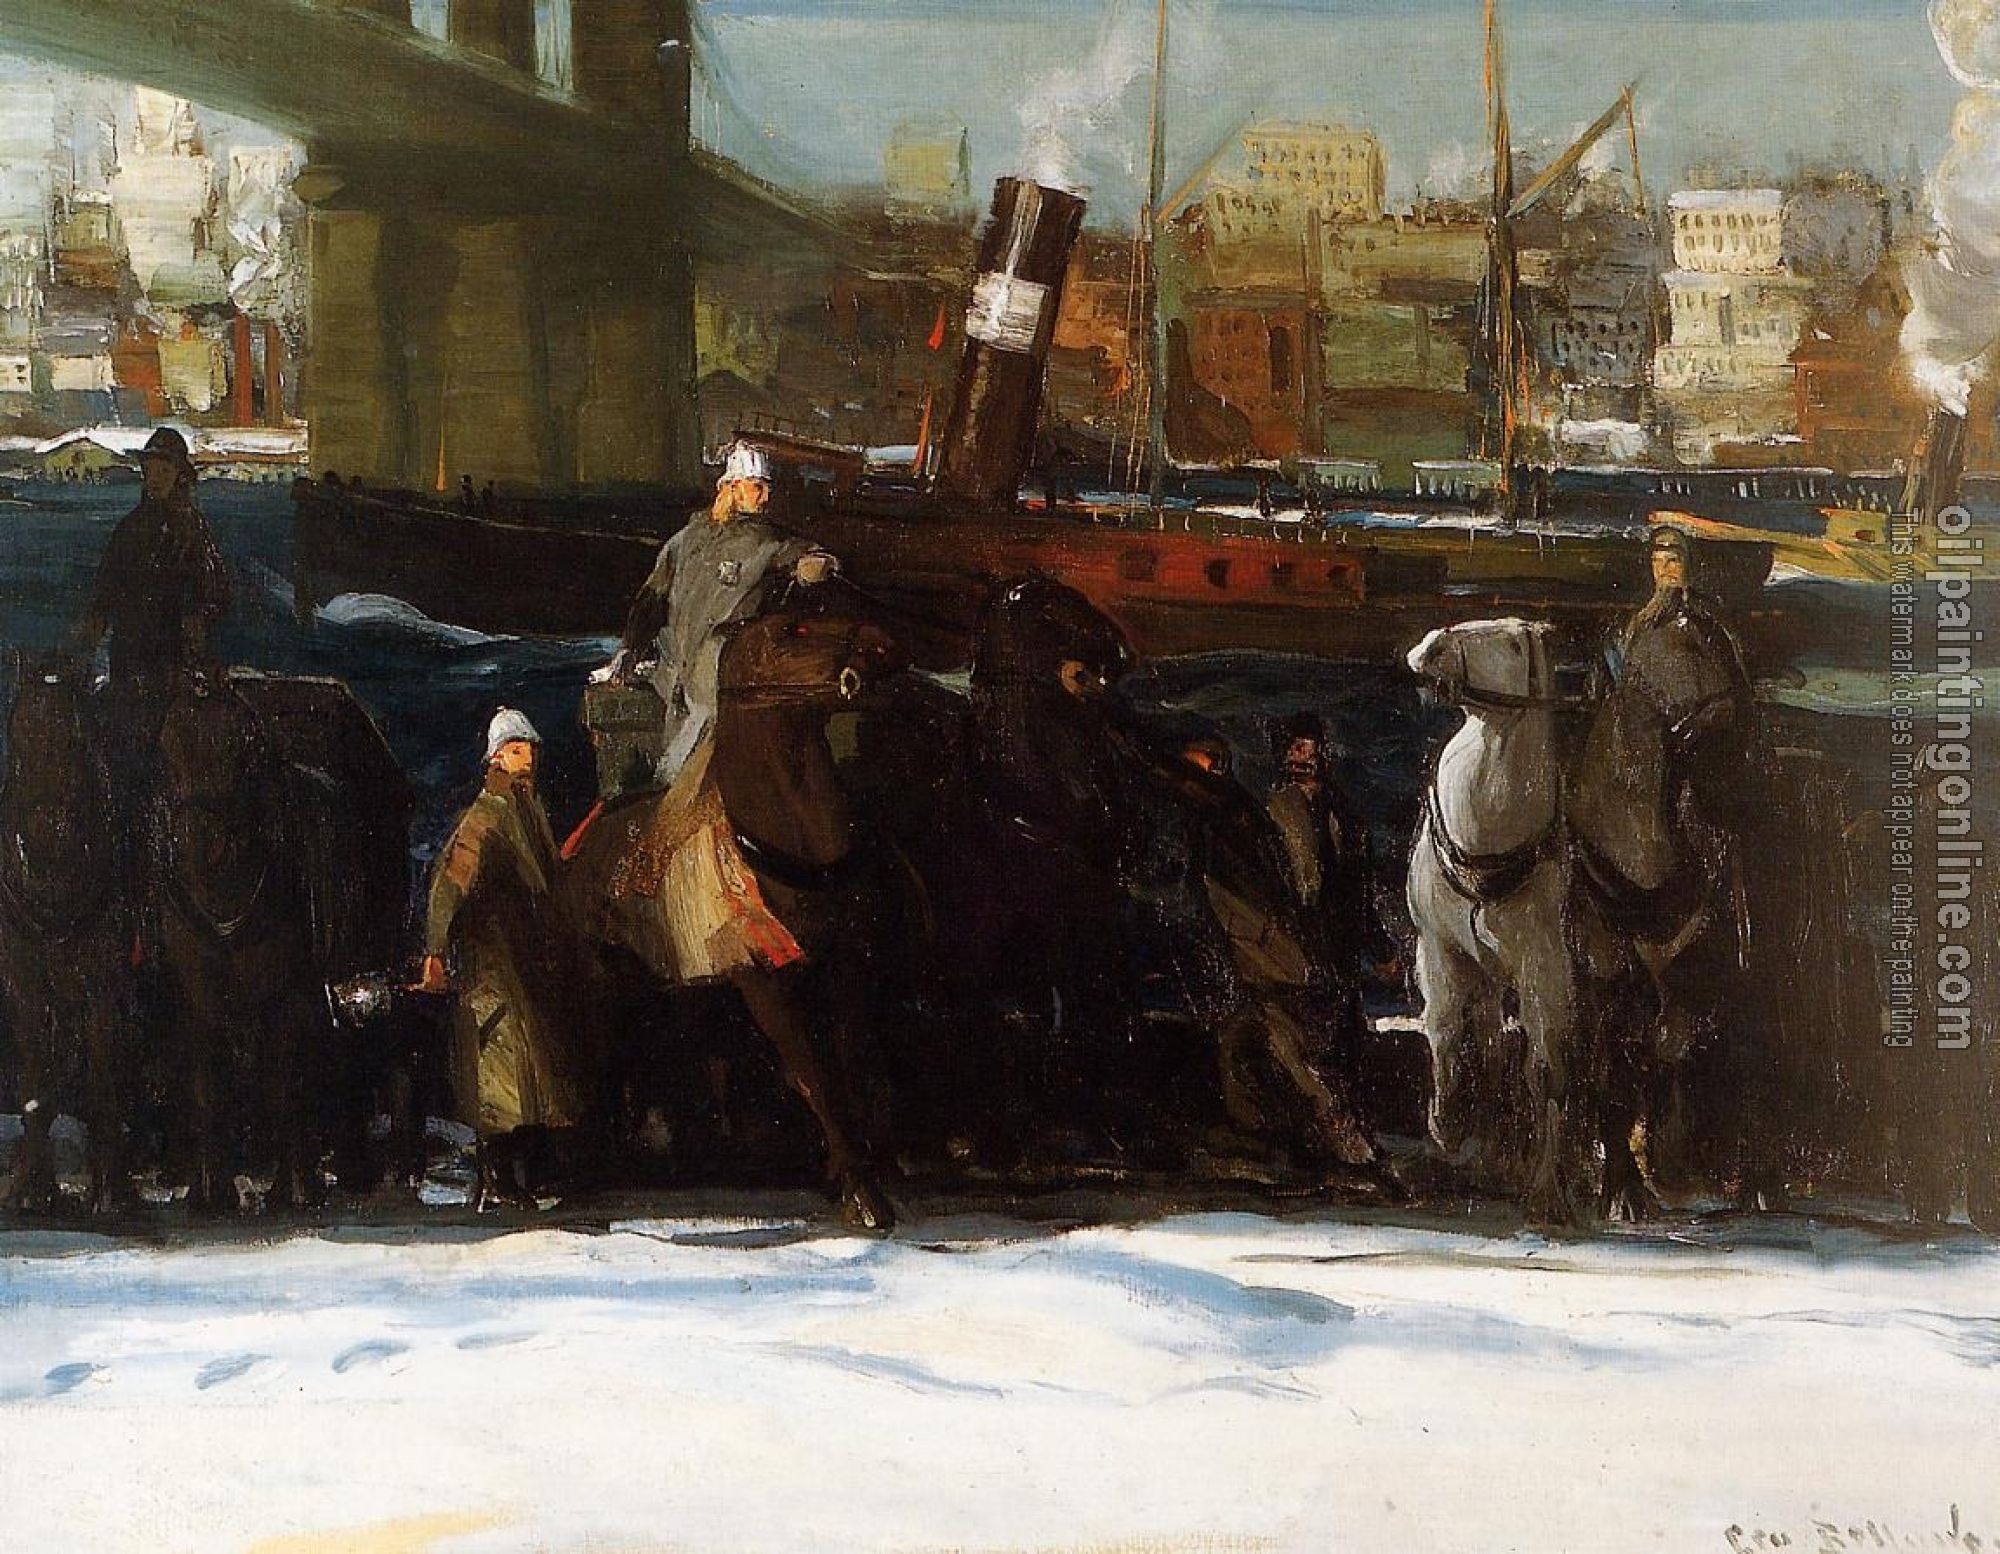 Bellows, George - Snow Dumpers